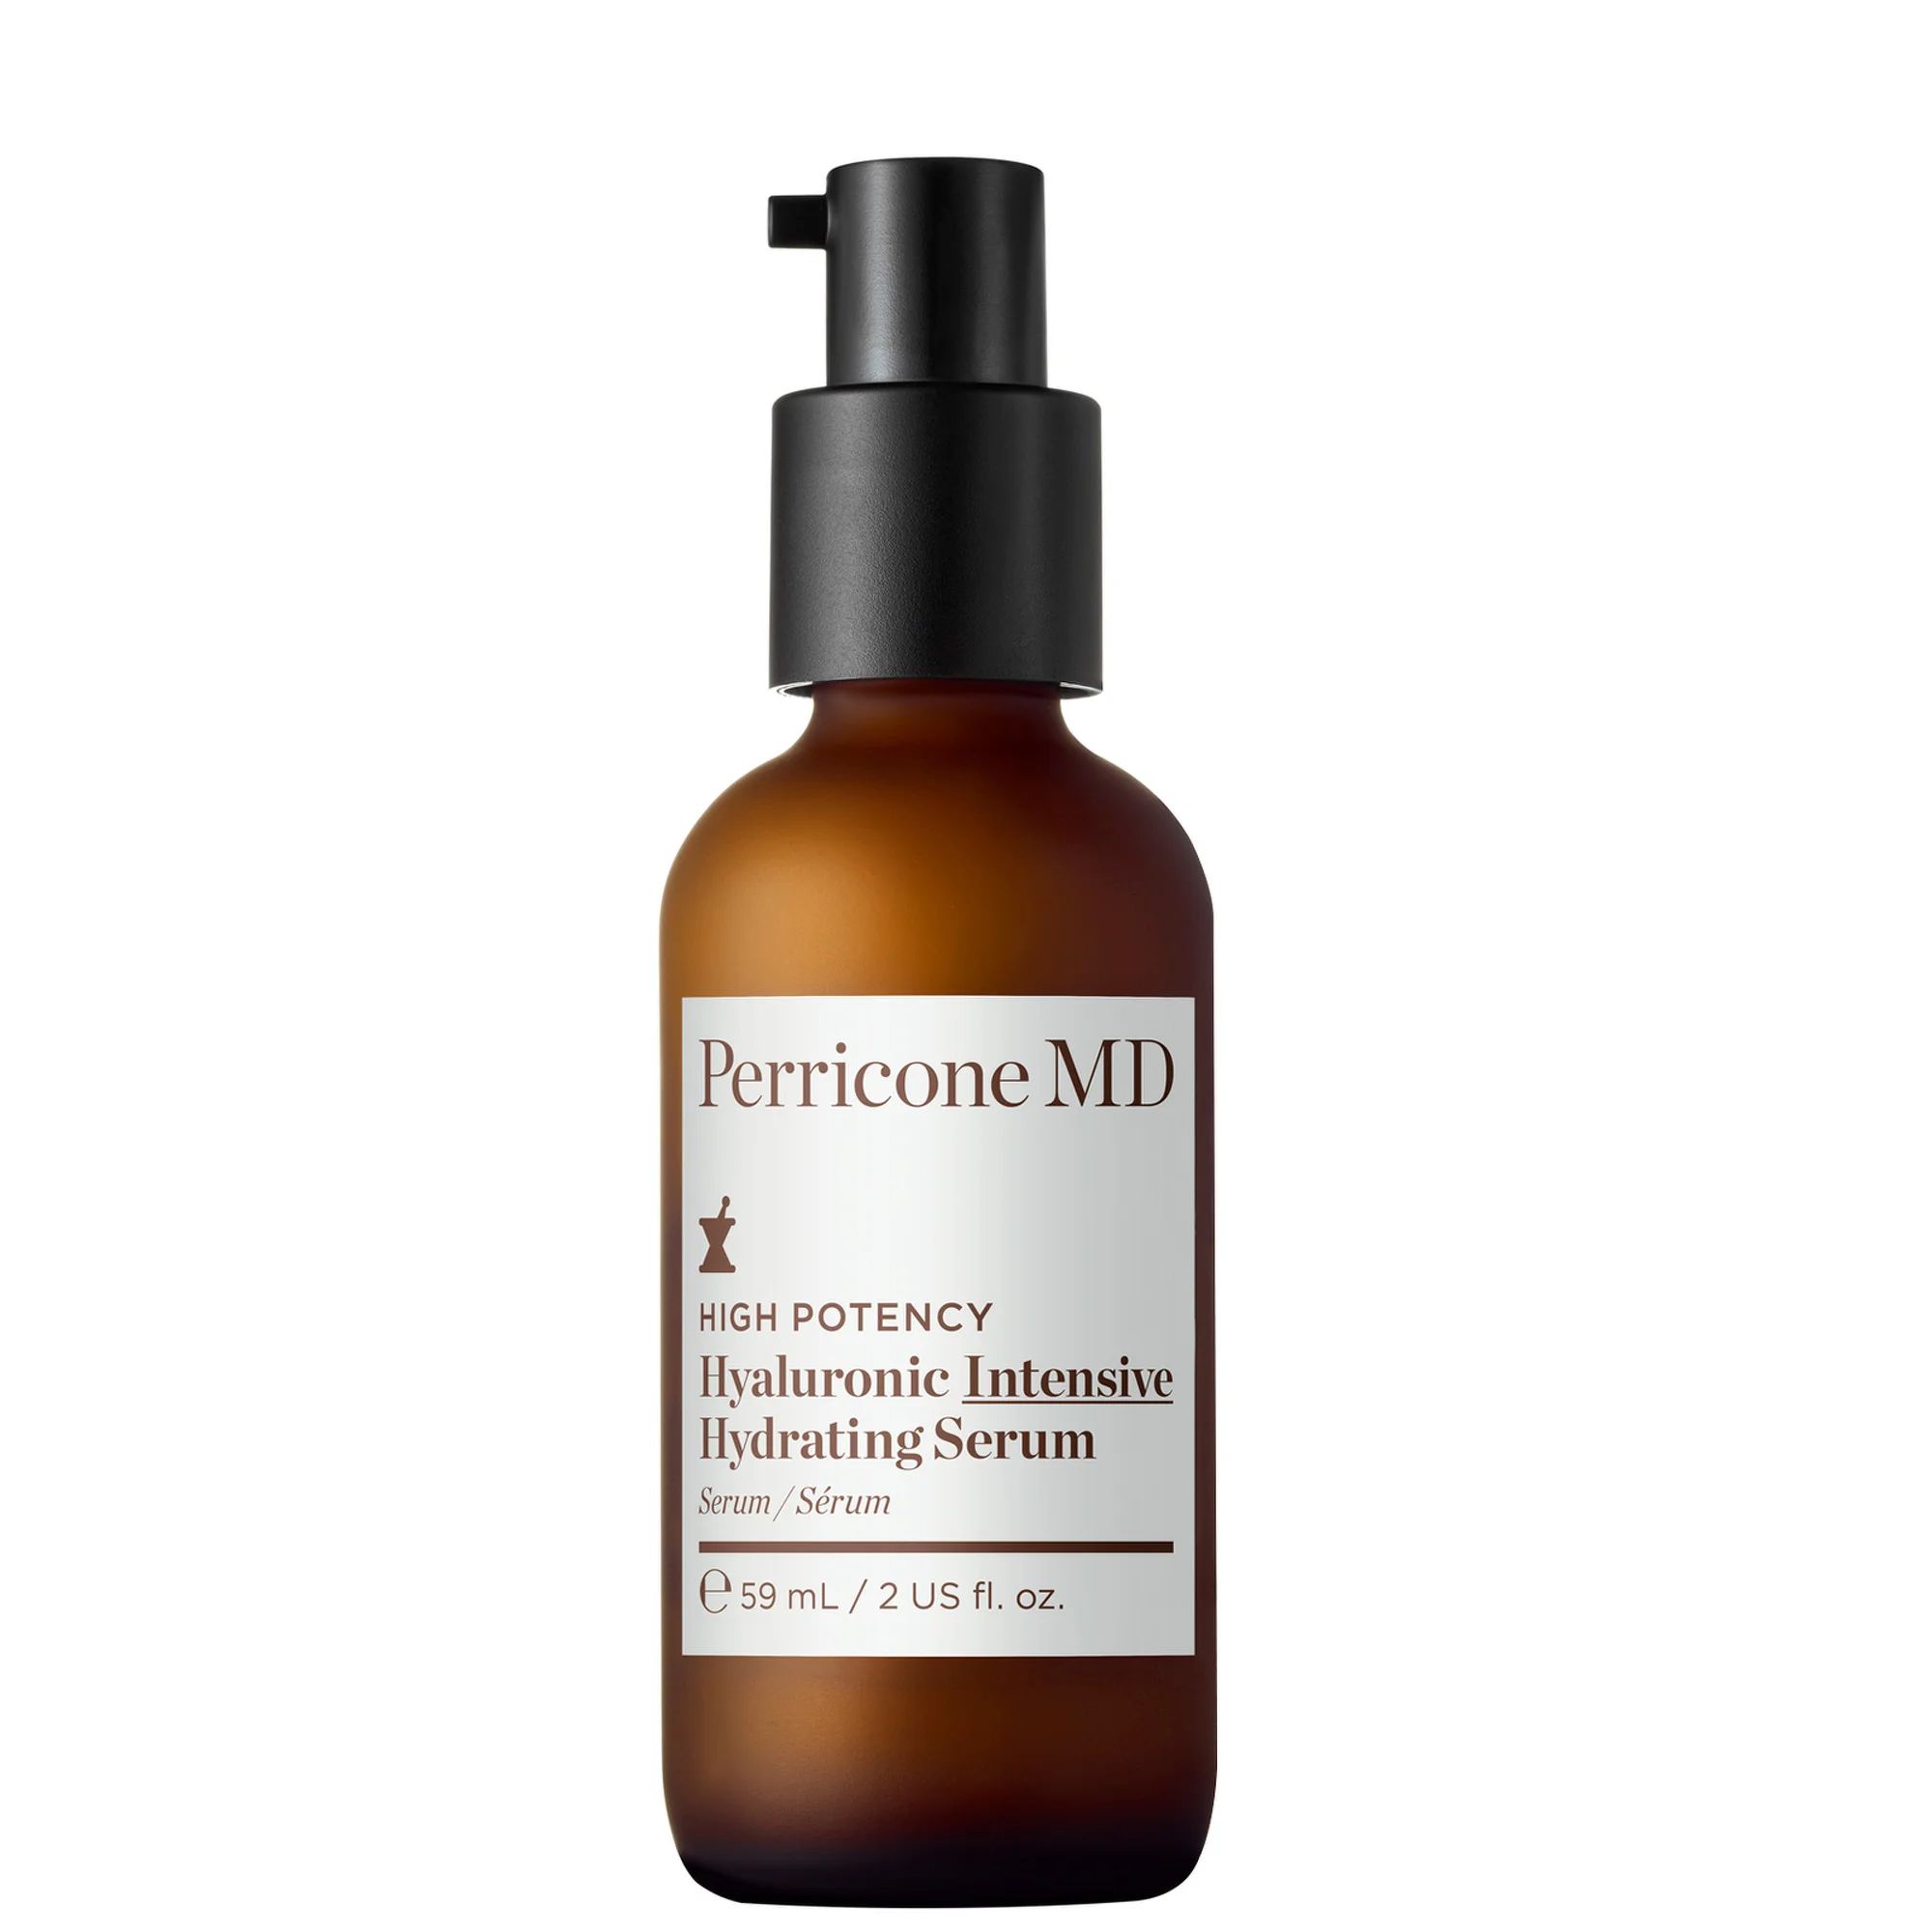 Perricone MD High Potency Hyaluronic Intensive Serum 59ml Image 1